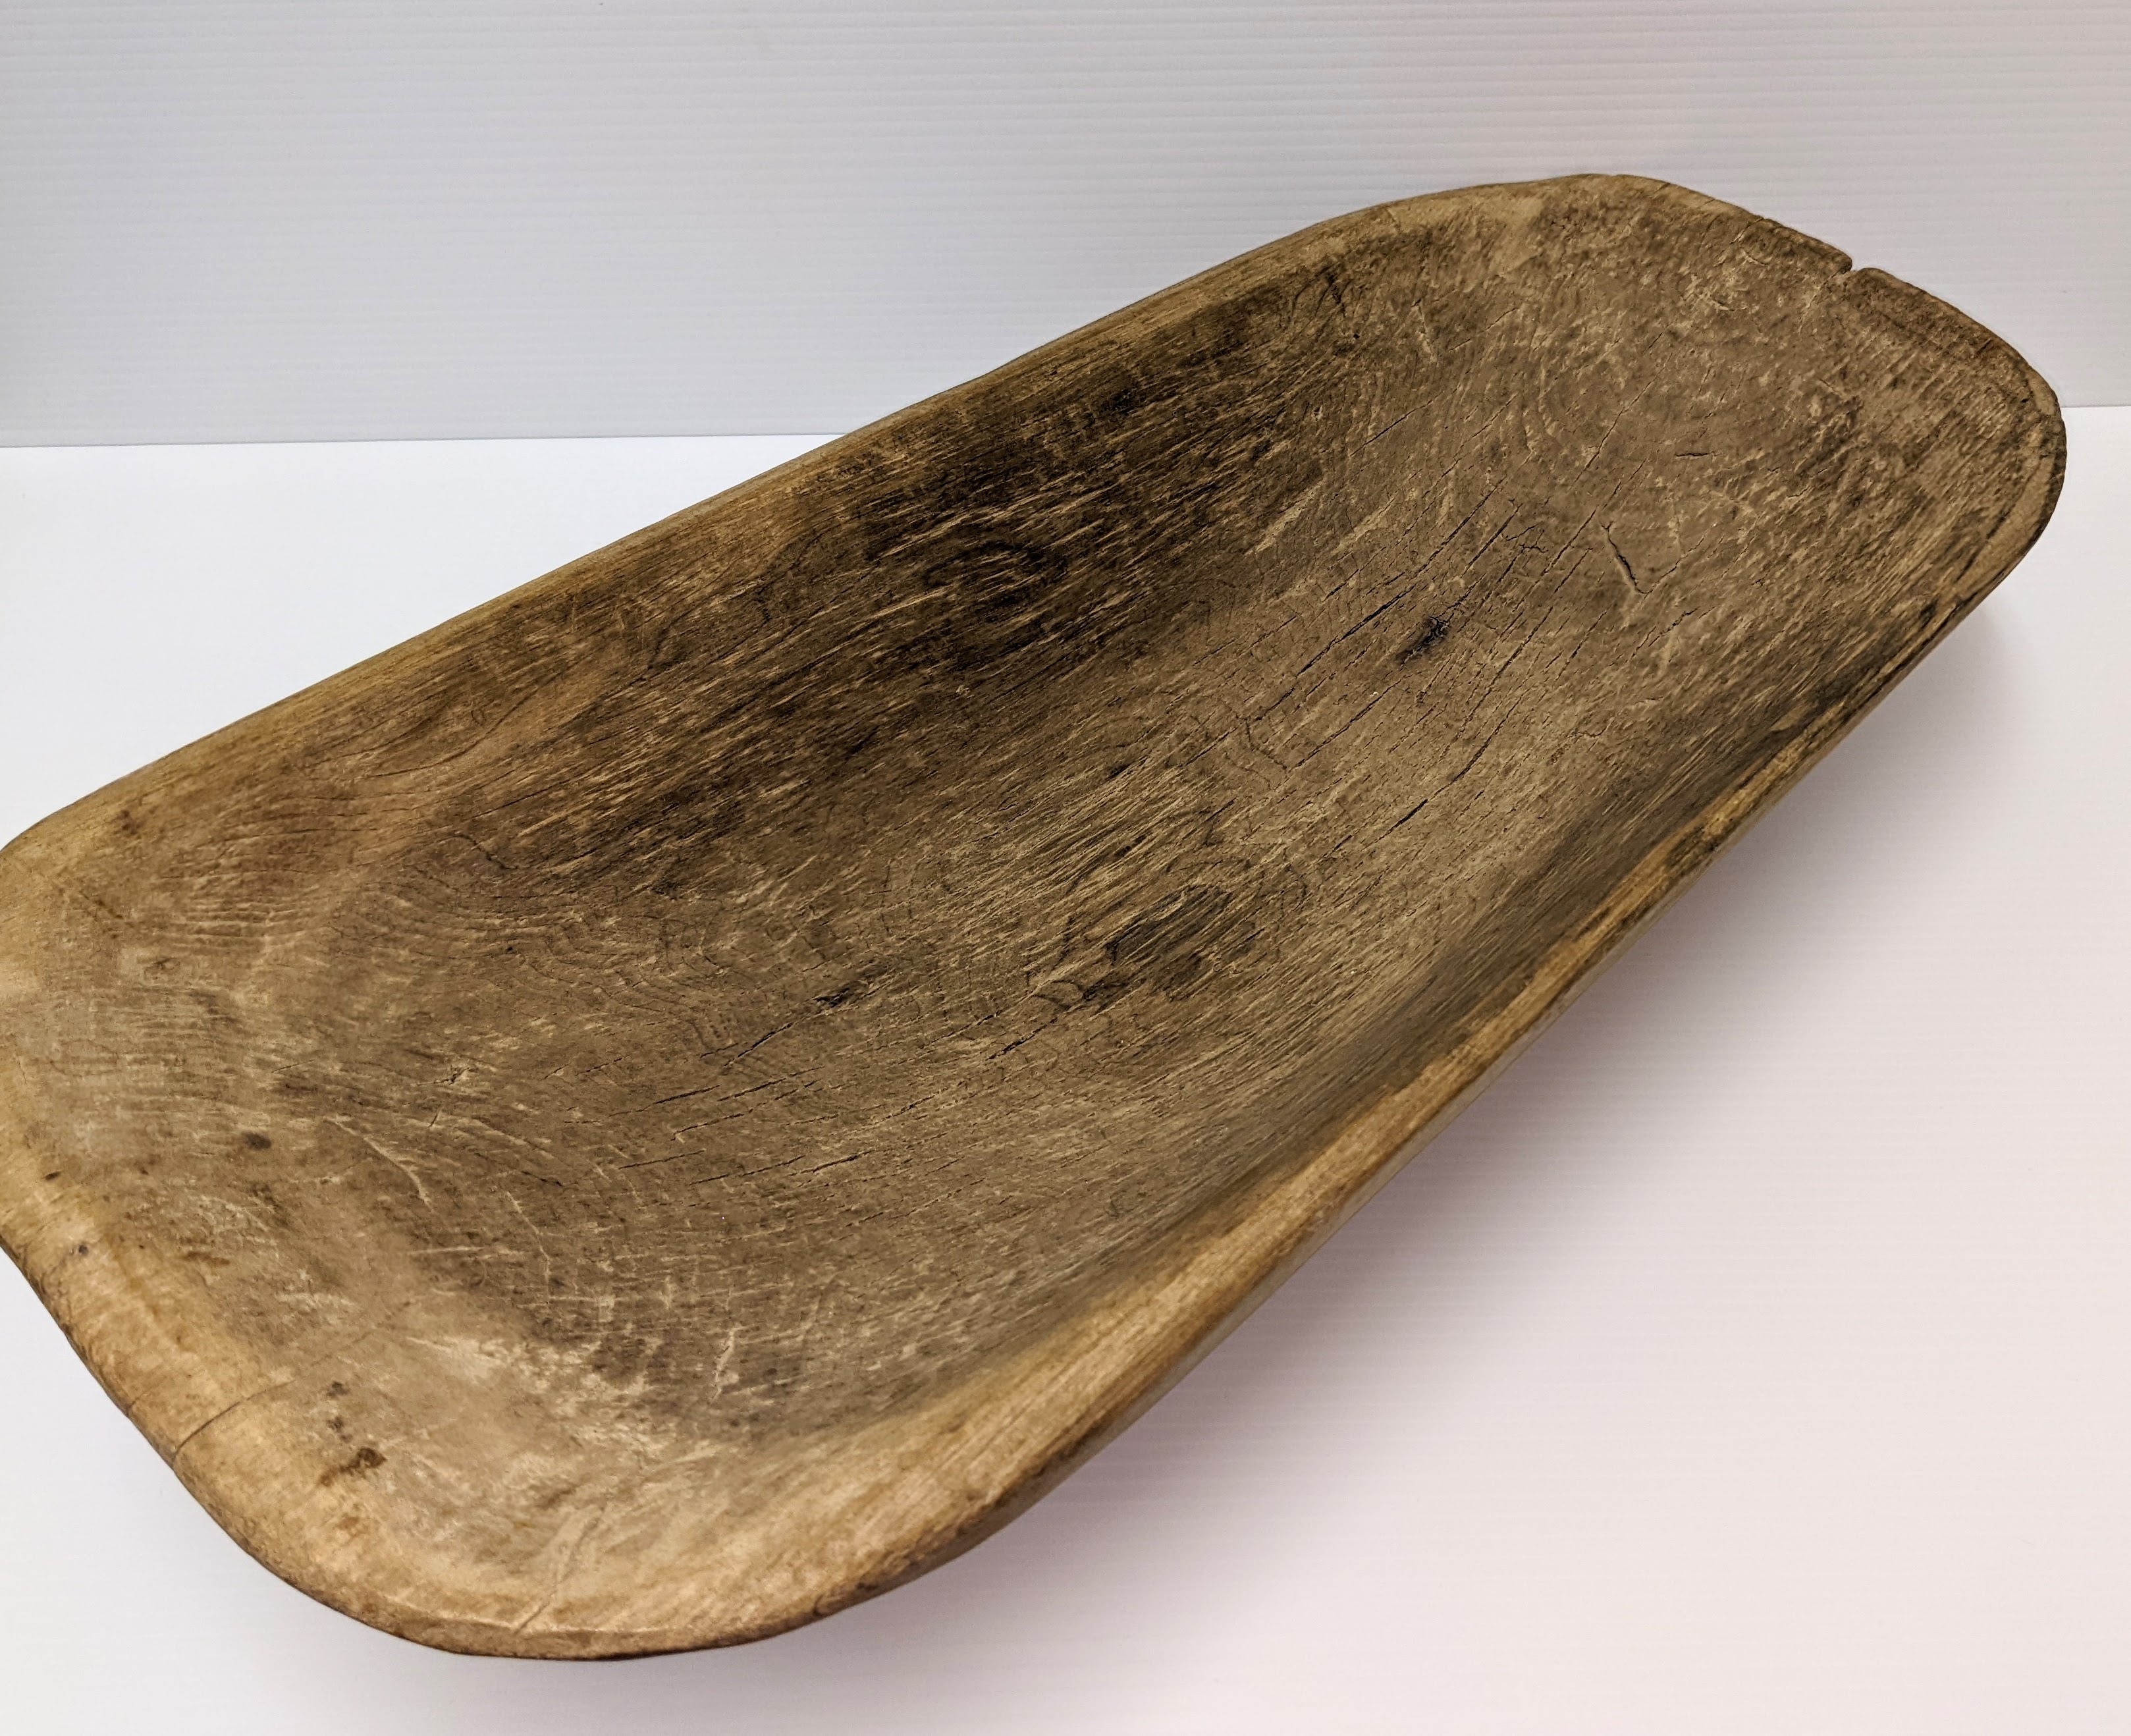 This large wooden bowl is labelled as a babies bathtub. It is 'dug-out' in style meaning it once was a full log that has been carved into its bowl shape. Though we don't have an age of the artifact it's smooth surface and various markings indicate it is well used and washed many a child. 
11/4/2022
999.03.94 / Hitchcock, Eunice